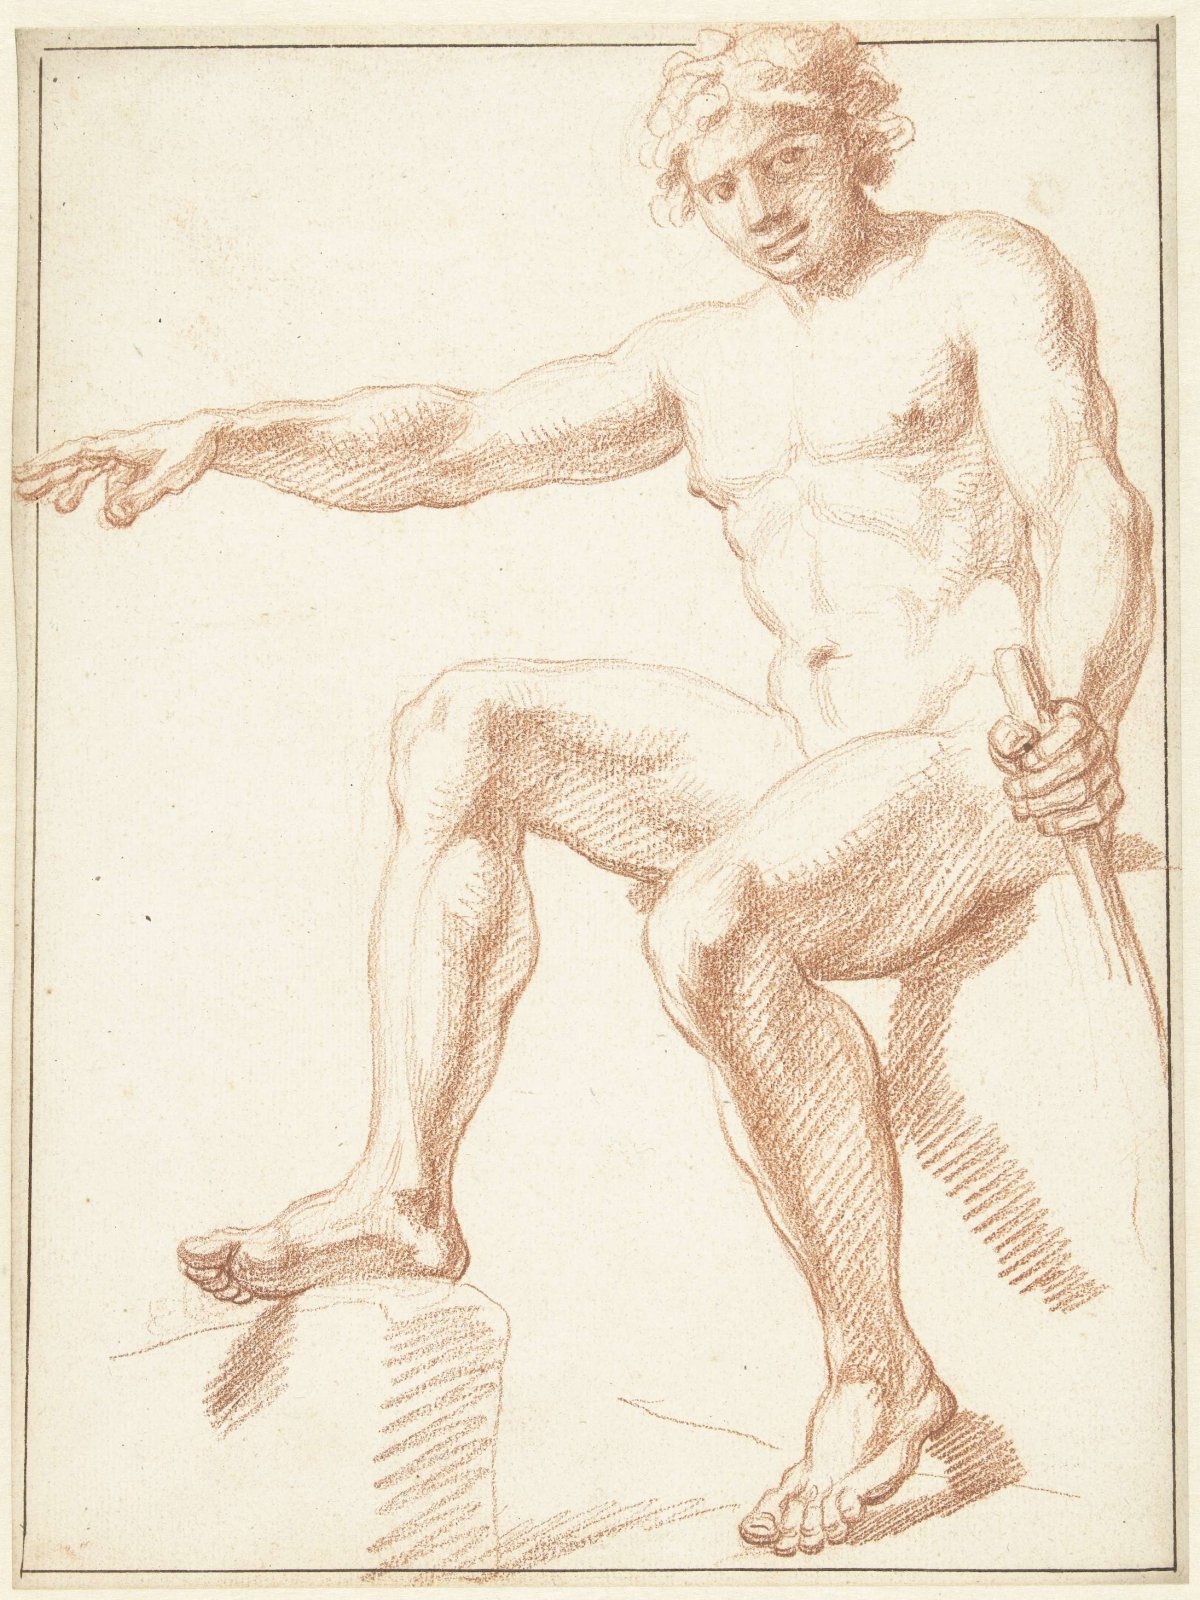 Study of male nude, seated with arm extended, Louis Fabritius Dubourg, 1703 - 1775